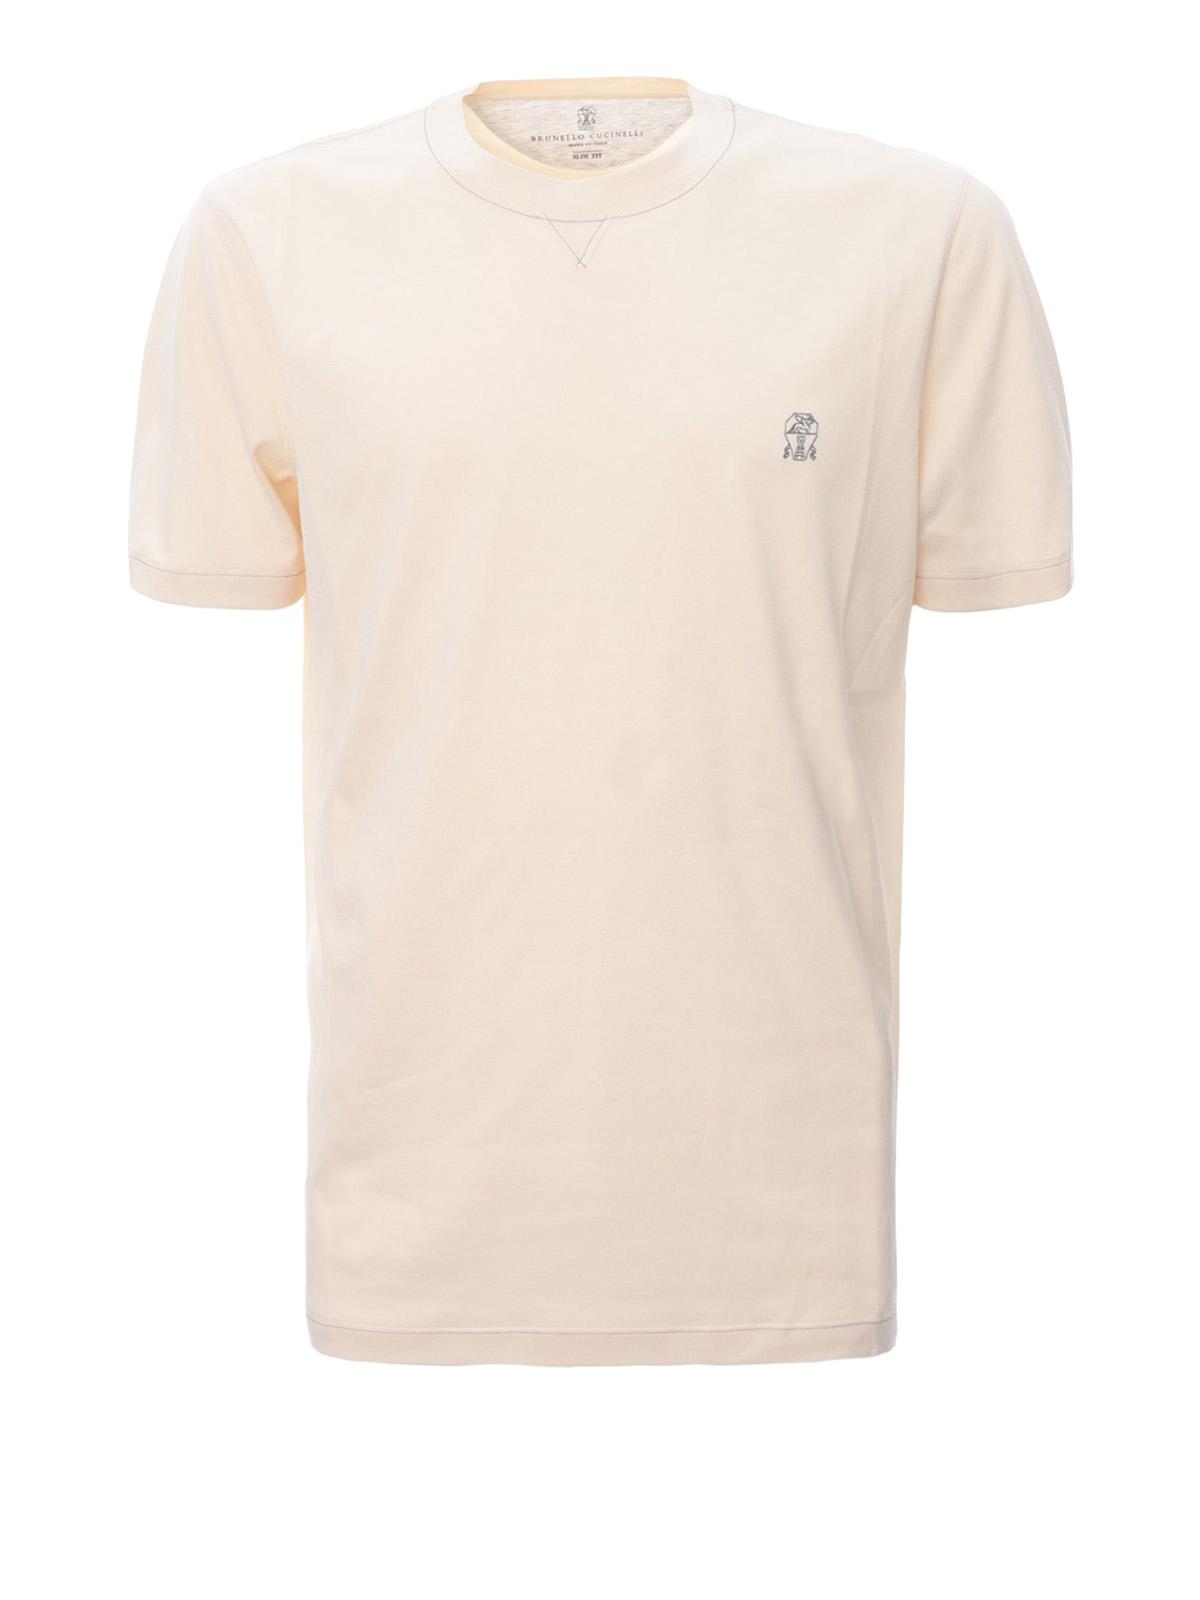 Brunello Cucinelli Cotton Logo Embroidery T-shirt in White for Men - Lyst